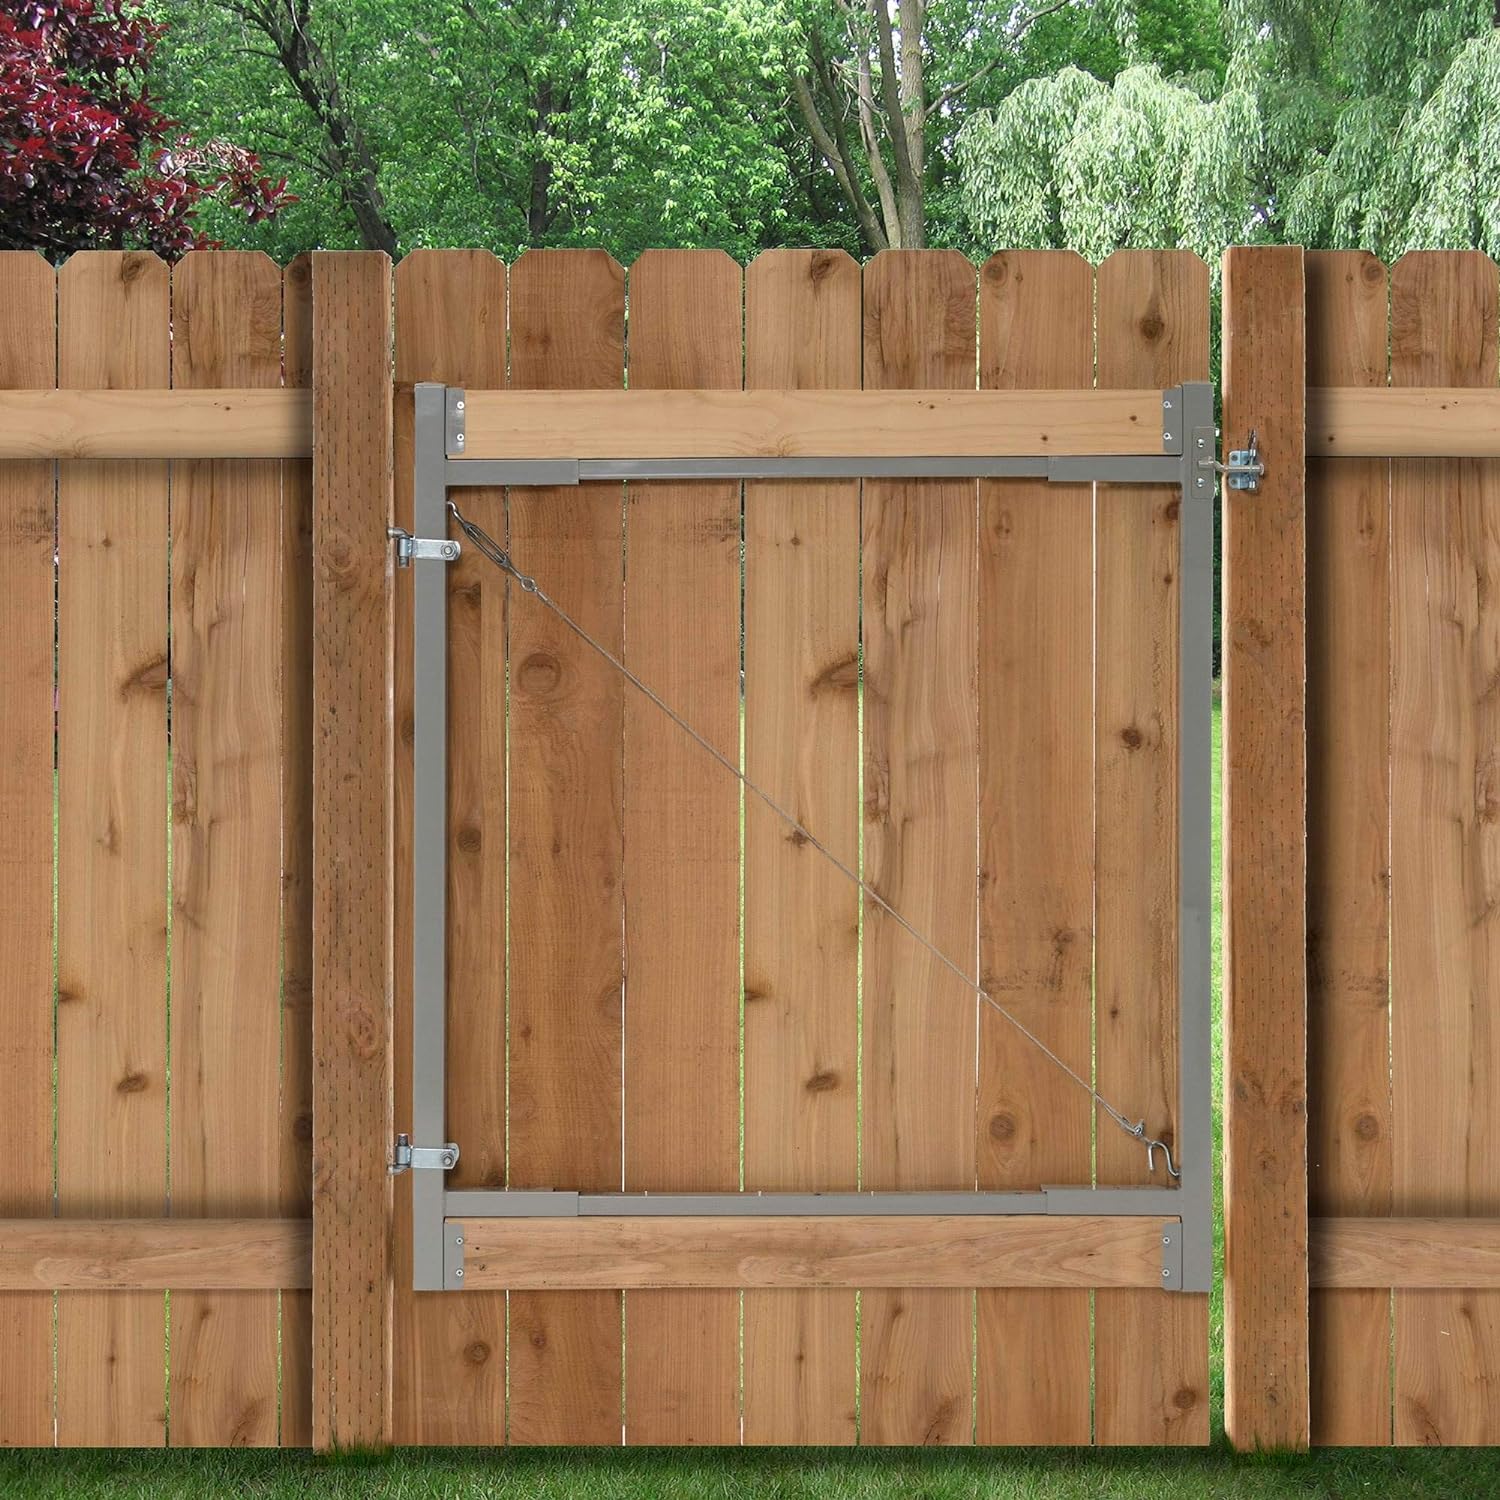 Adjust-A-Gate &#226;&#132;&#162; Steel Frame Gate Building Kit (36"-72" wide openings up to 6' high fence)